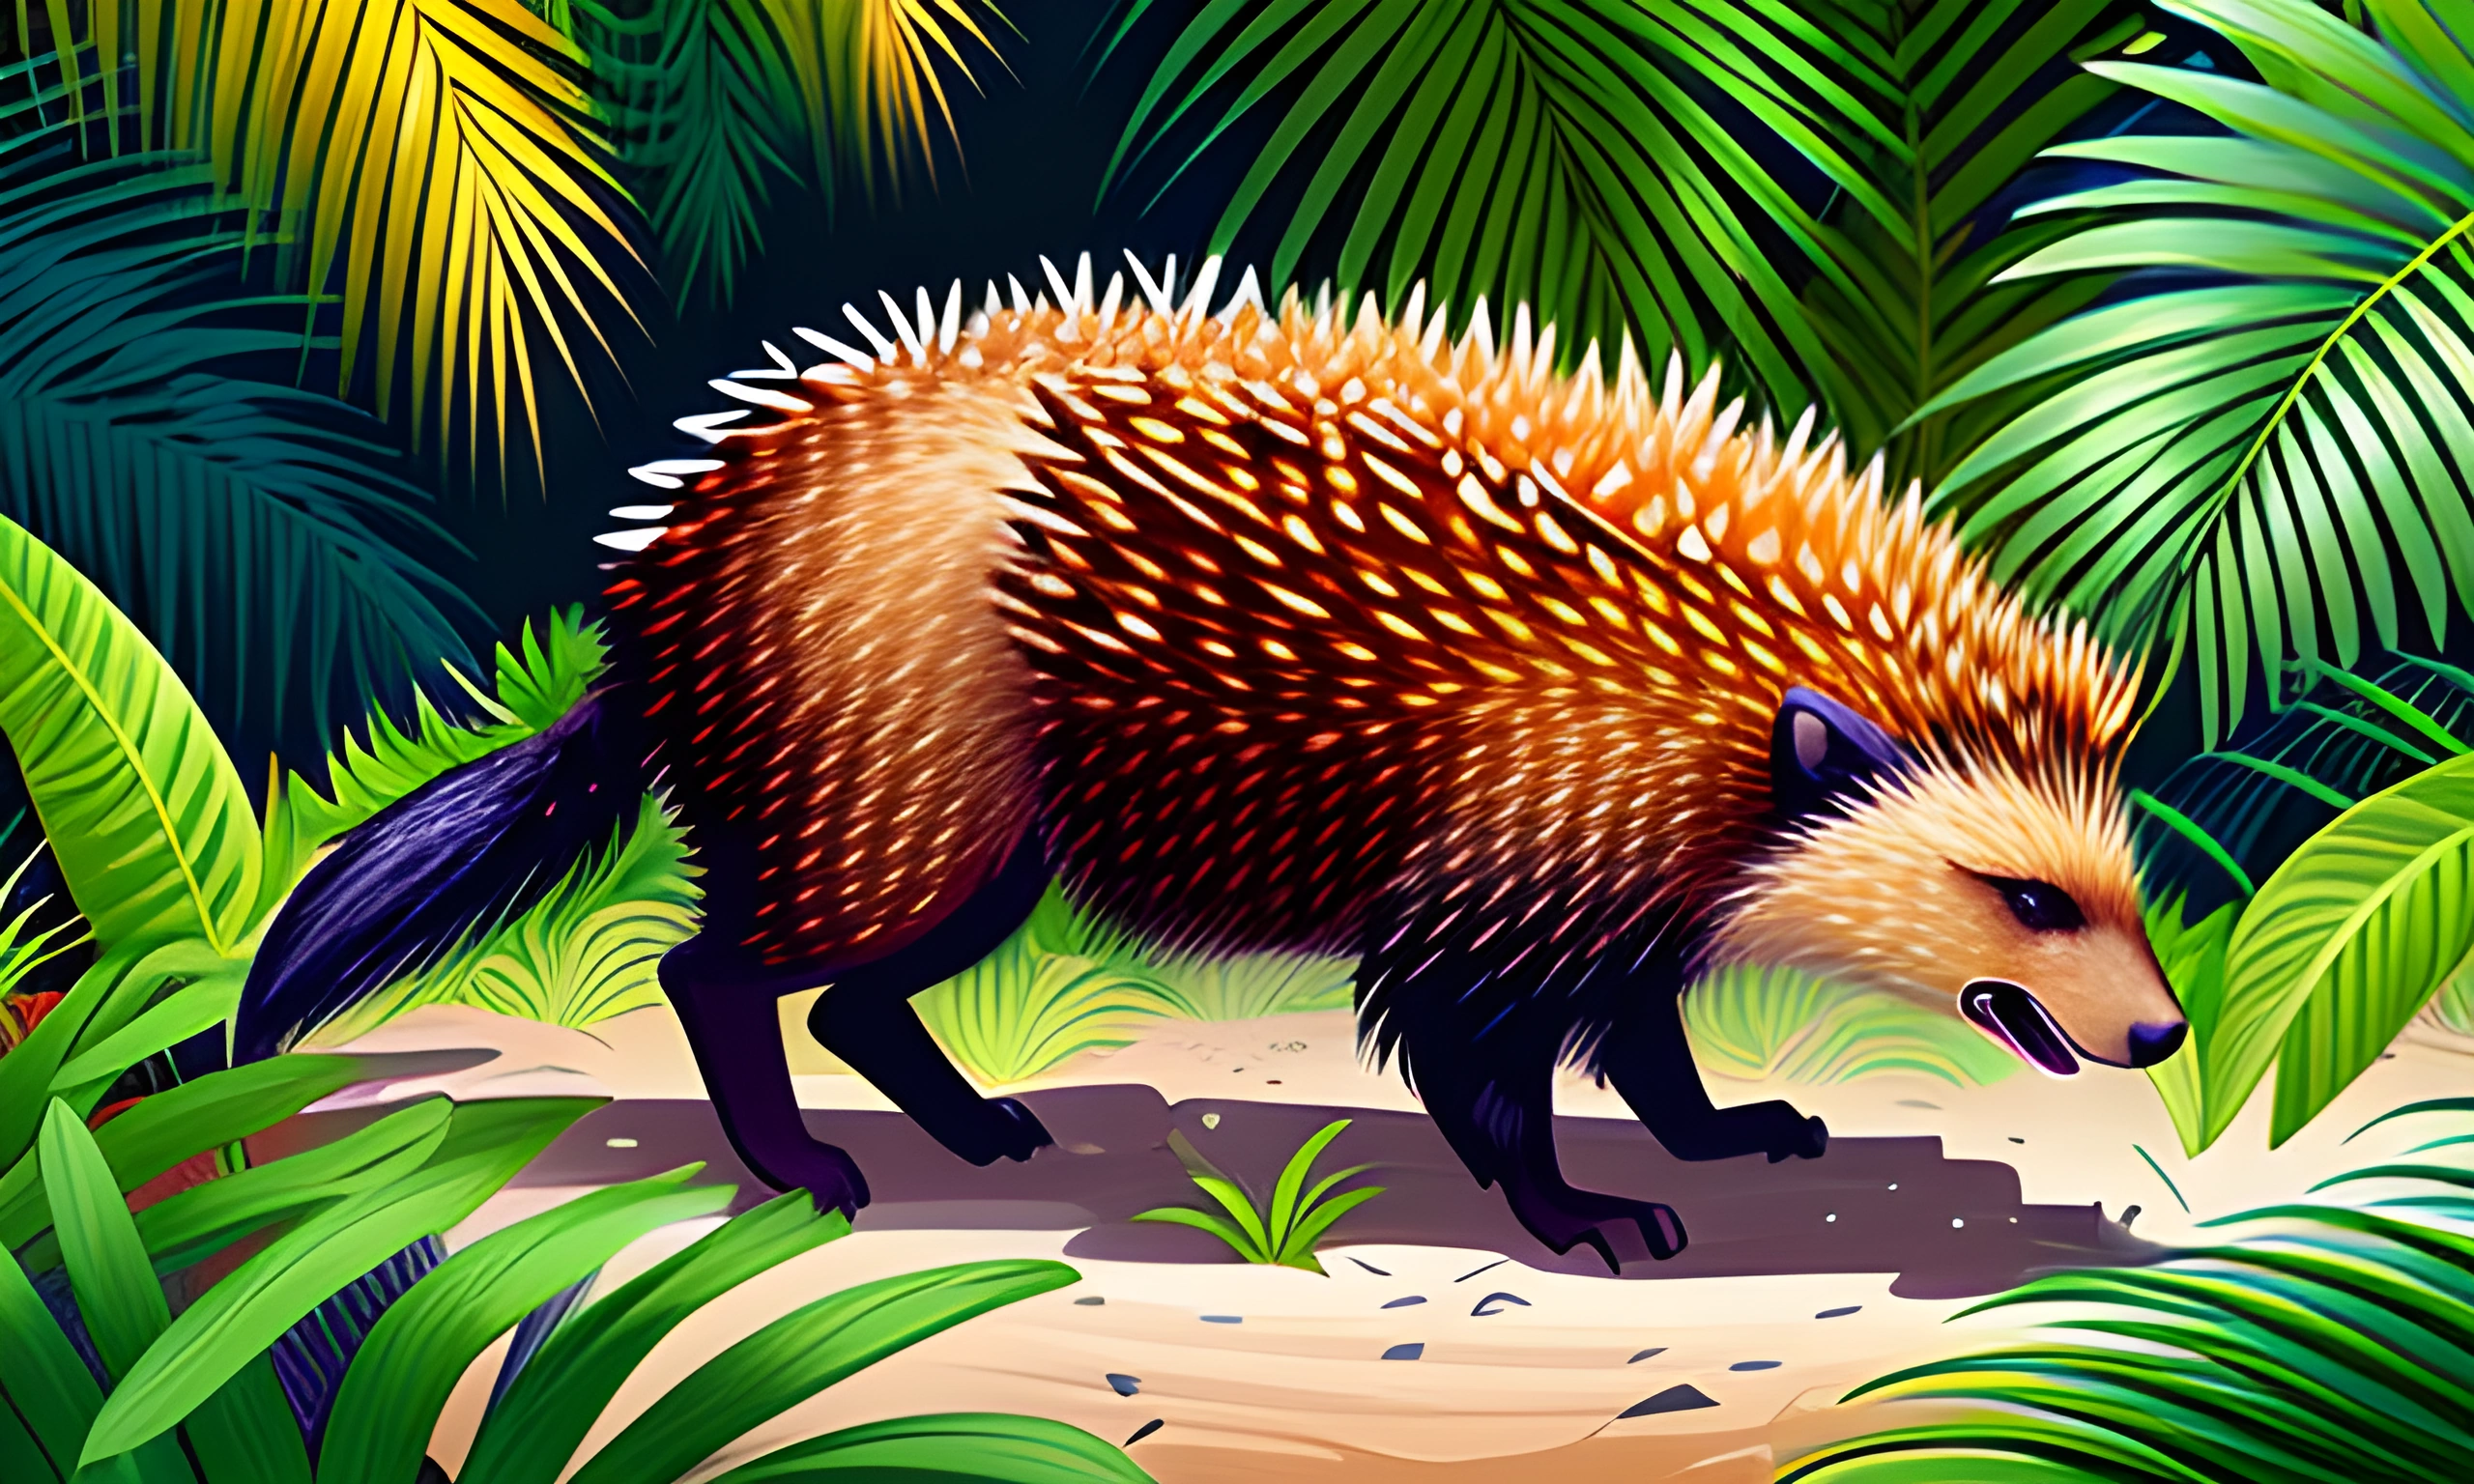 illustration of a porcupine walking through the jungle